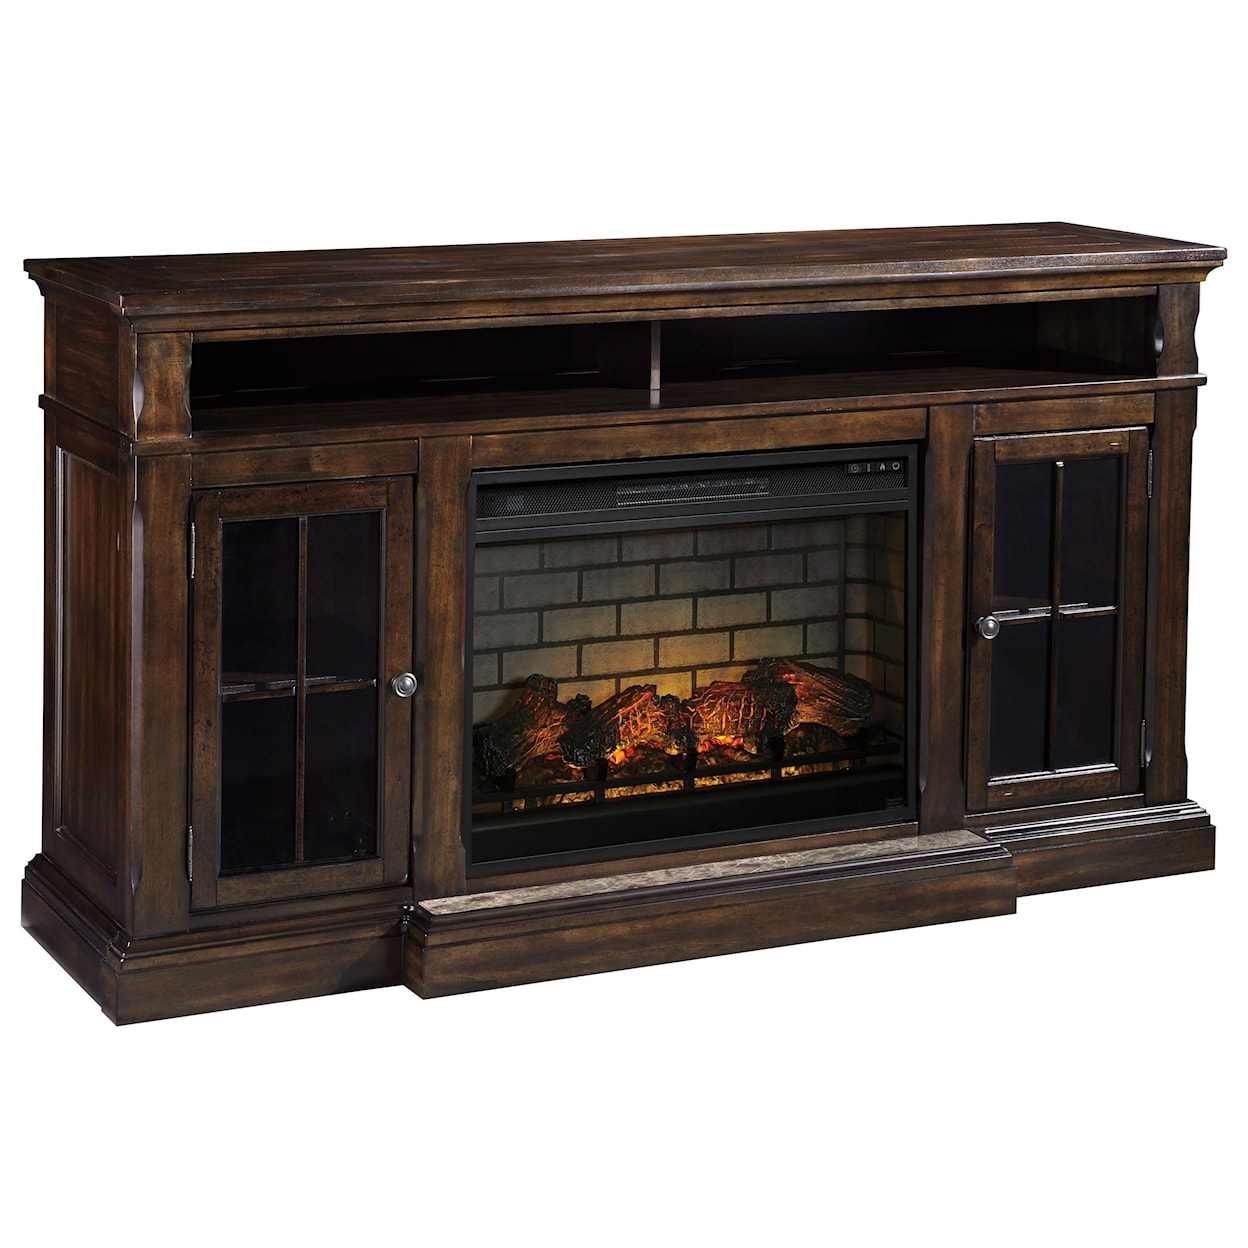 Signature Design by Ashley Roddinton Extra Large TV Stand with Fireplace Insert